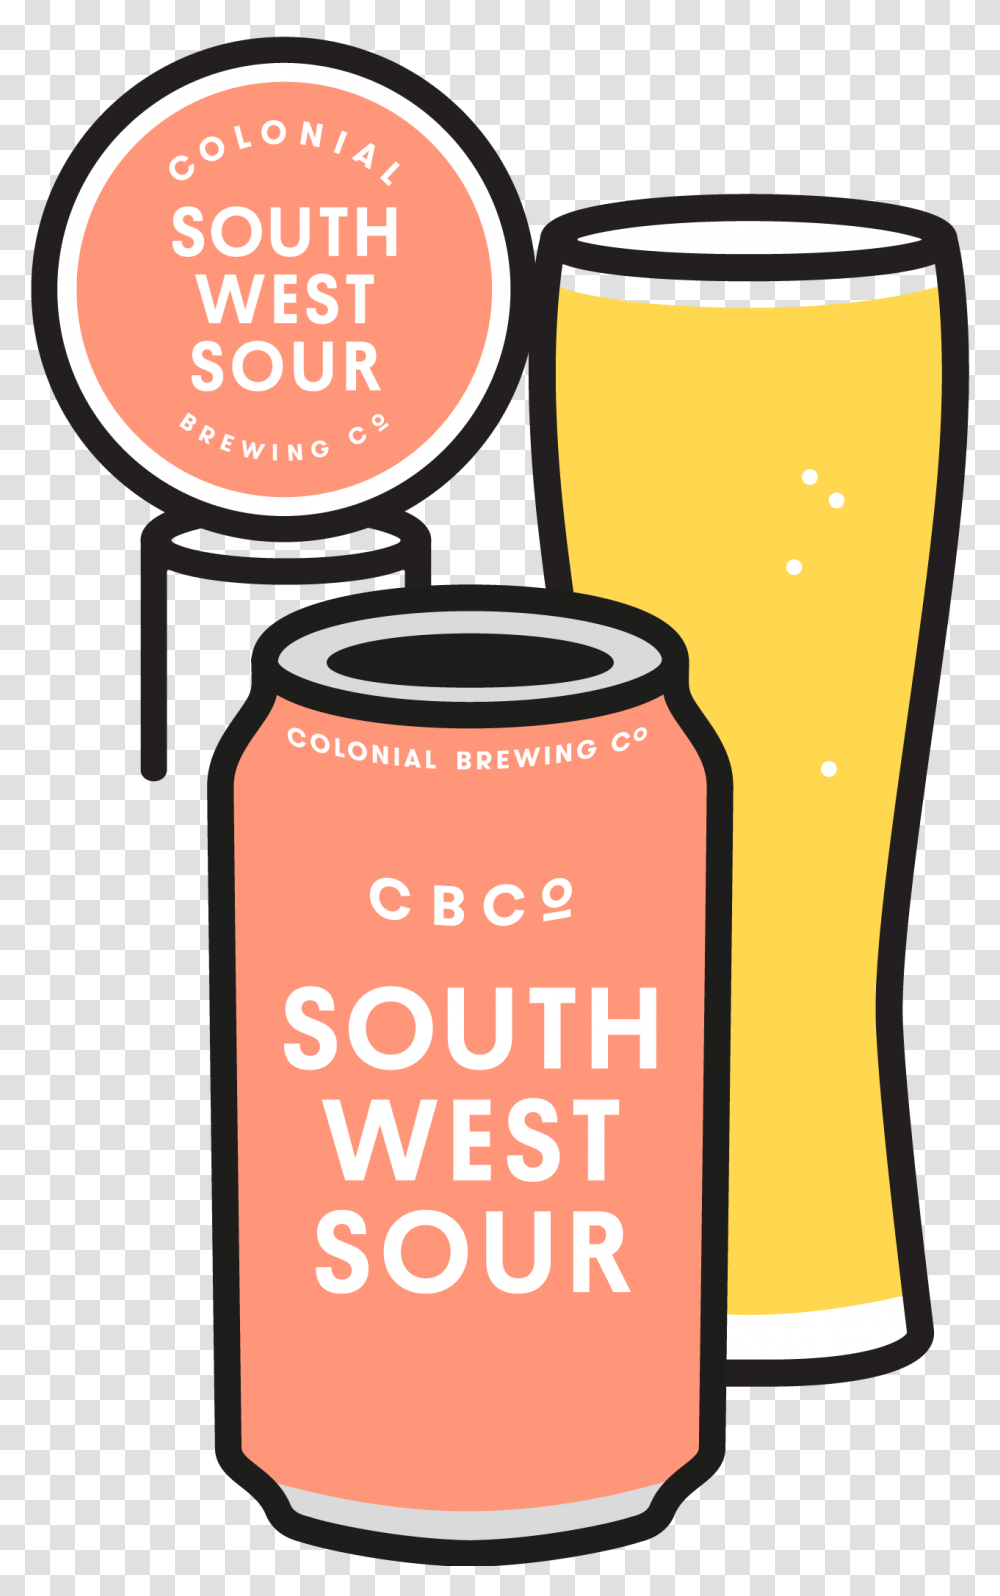 South West Sour Colonial Brewing Co, Tin, Can, Beverage, Drink Transparent Png